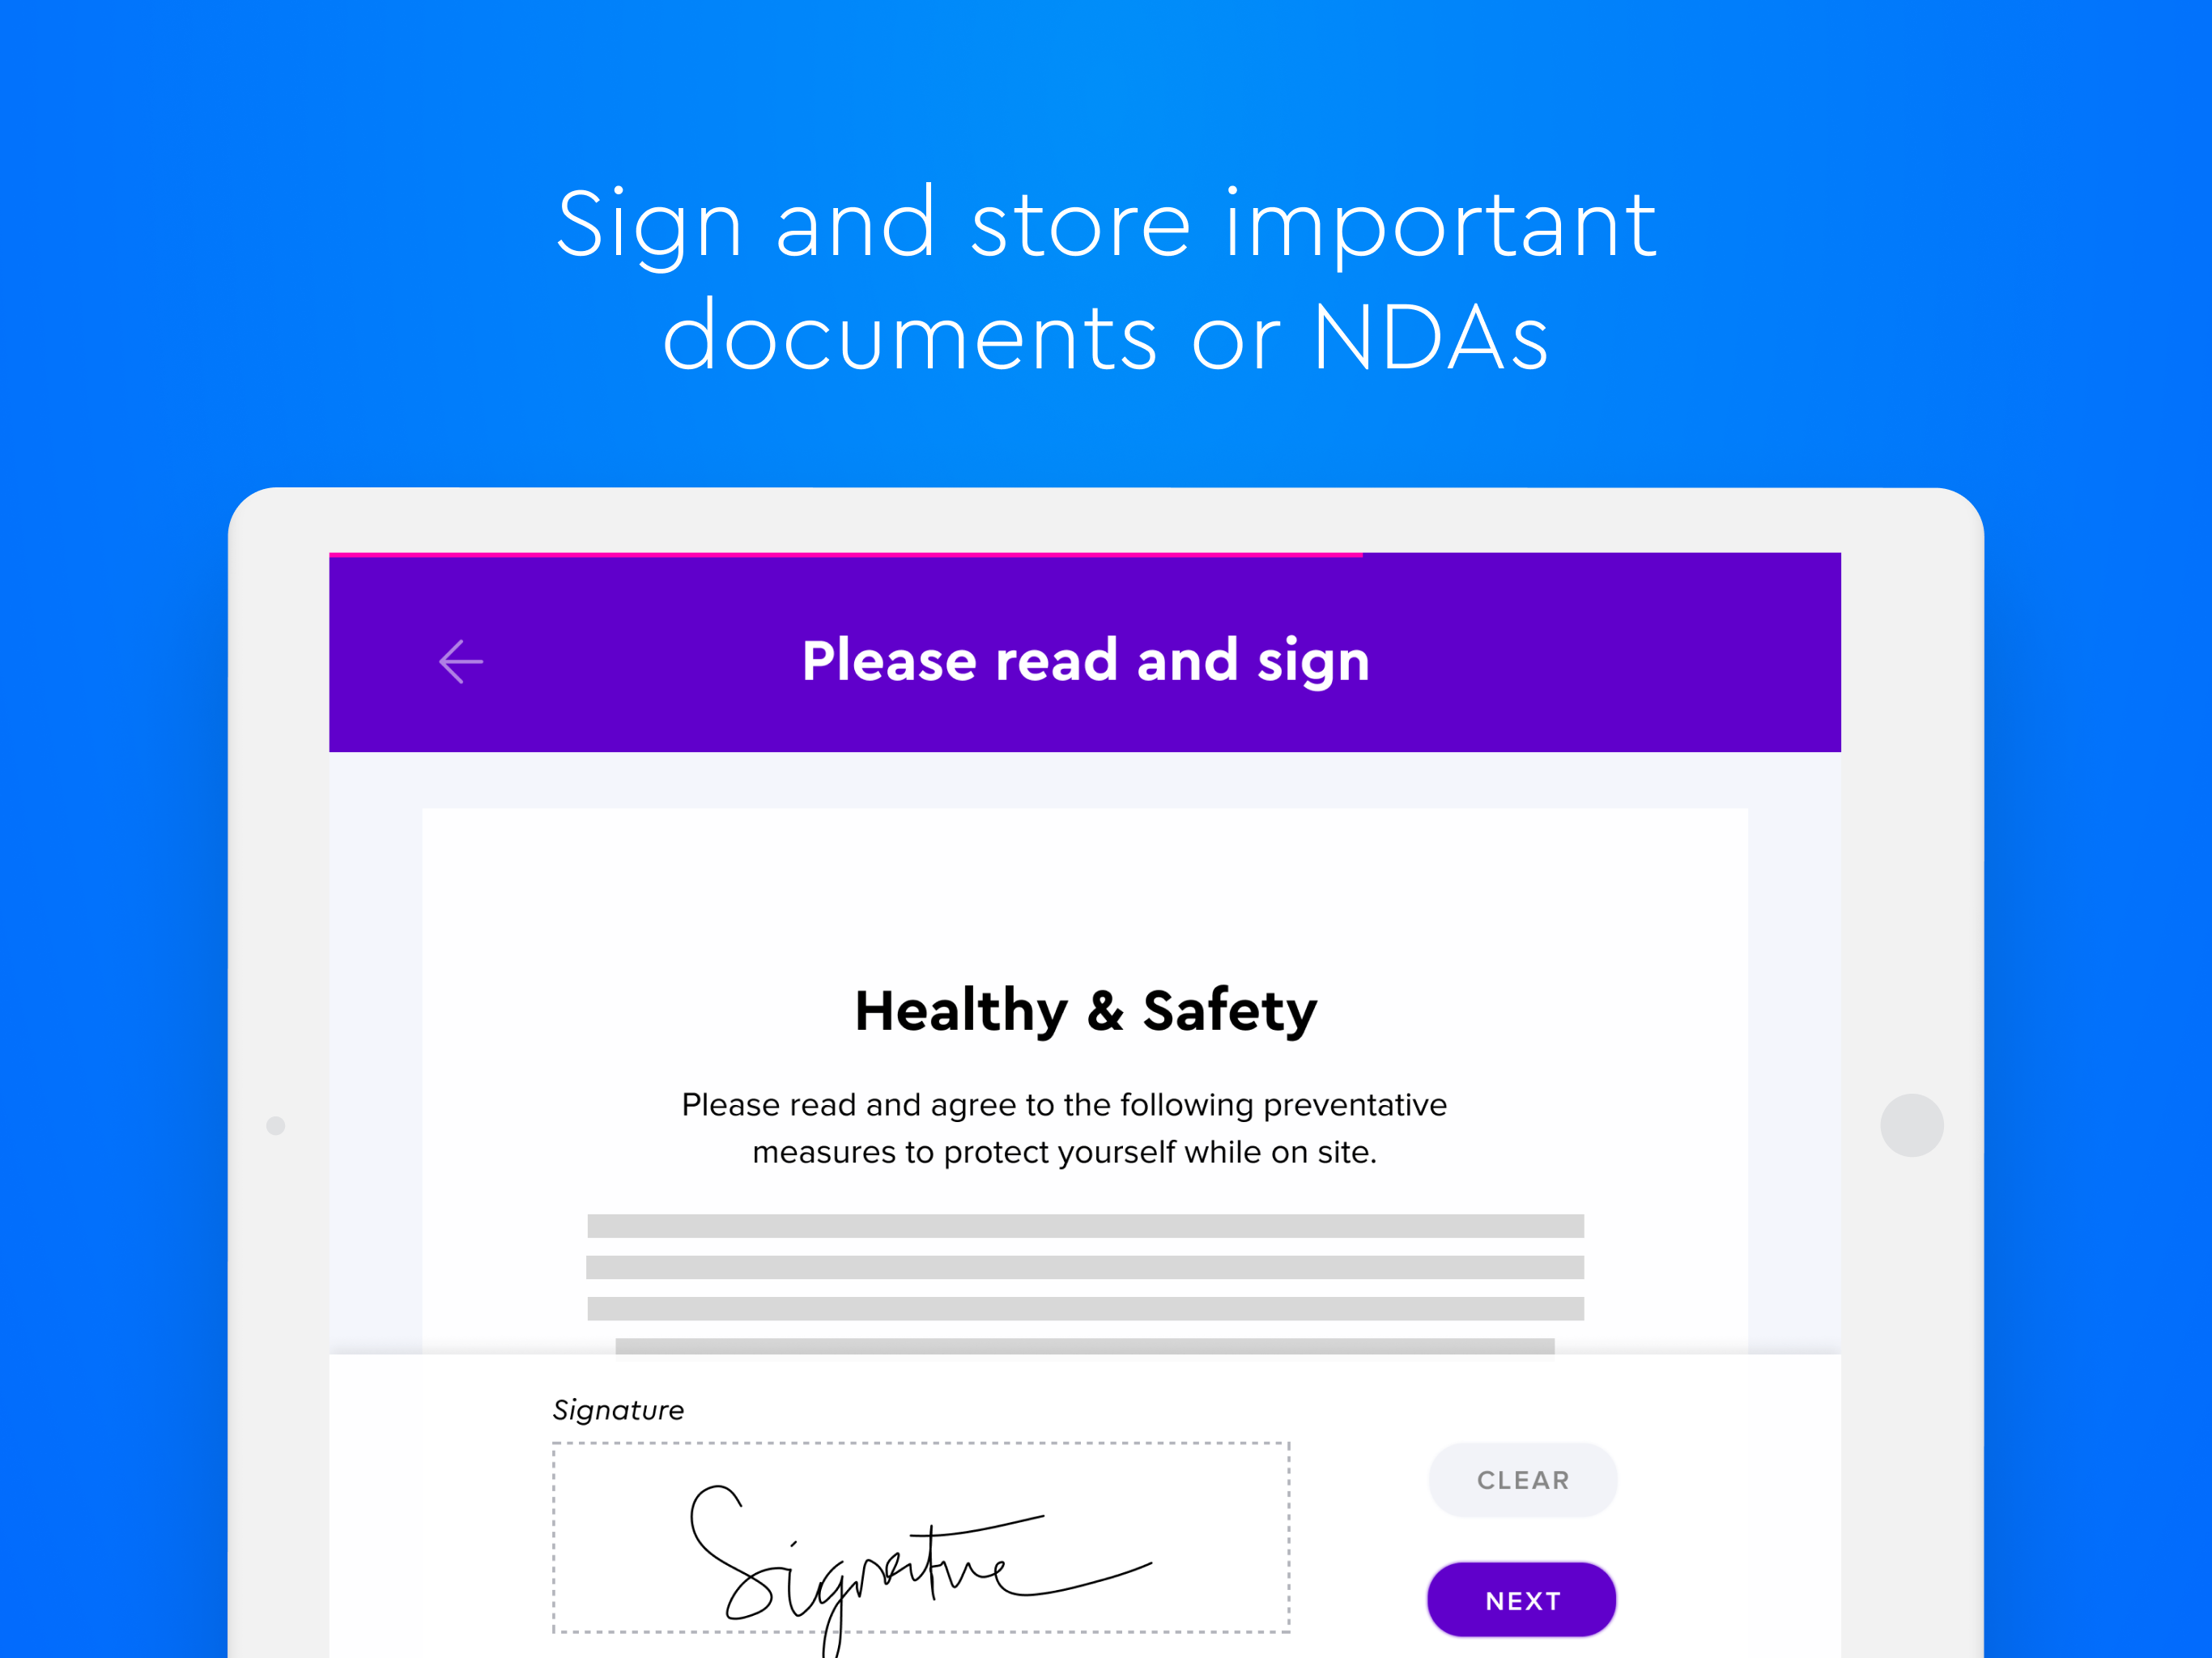 Make signing important documents or NDAs part of the sign in process so nothing gets missed